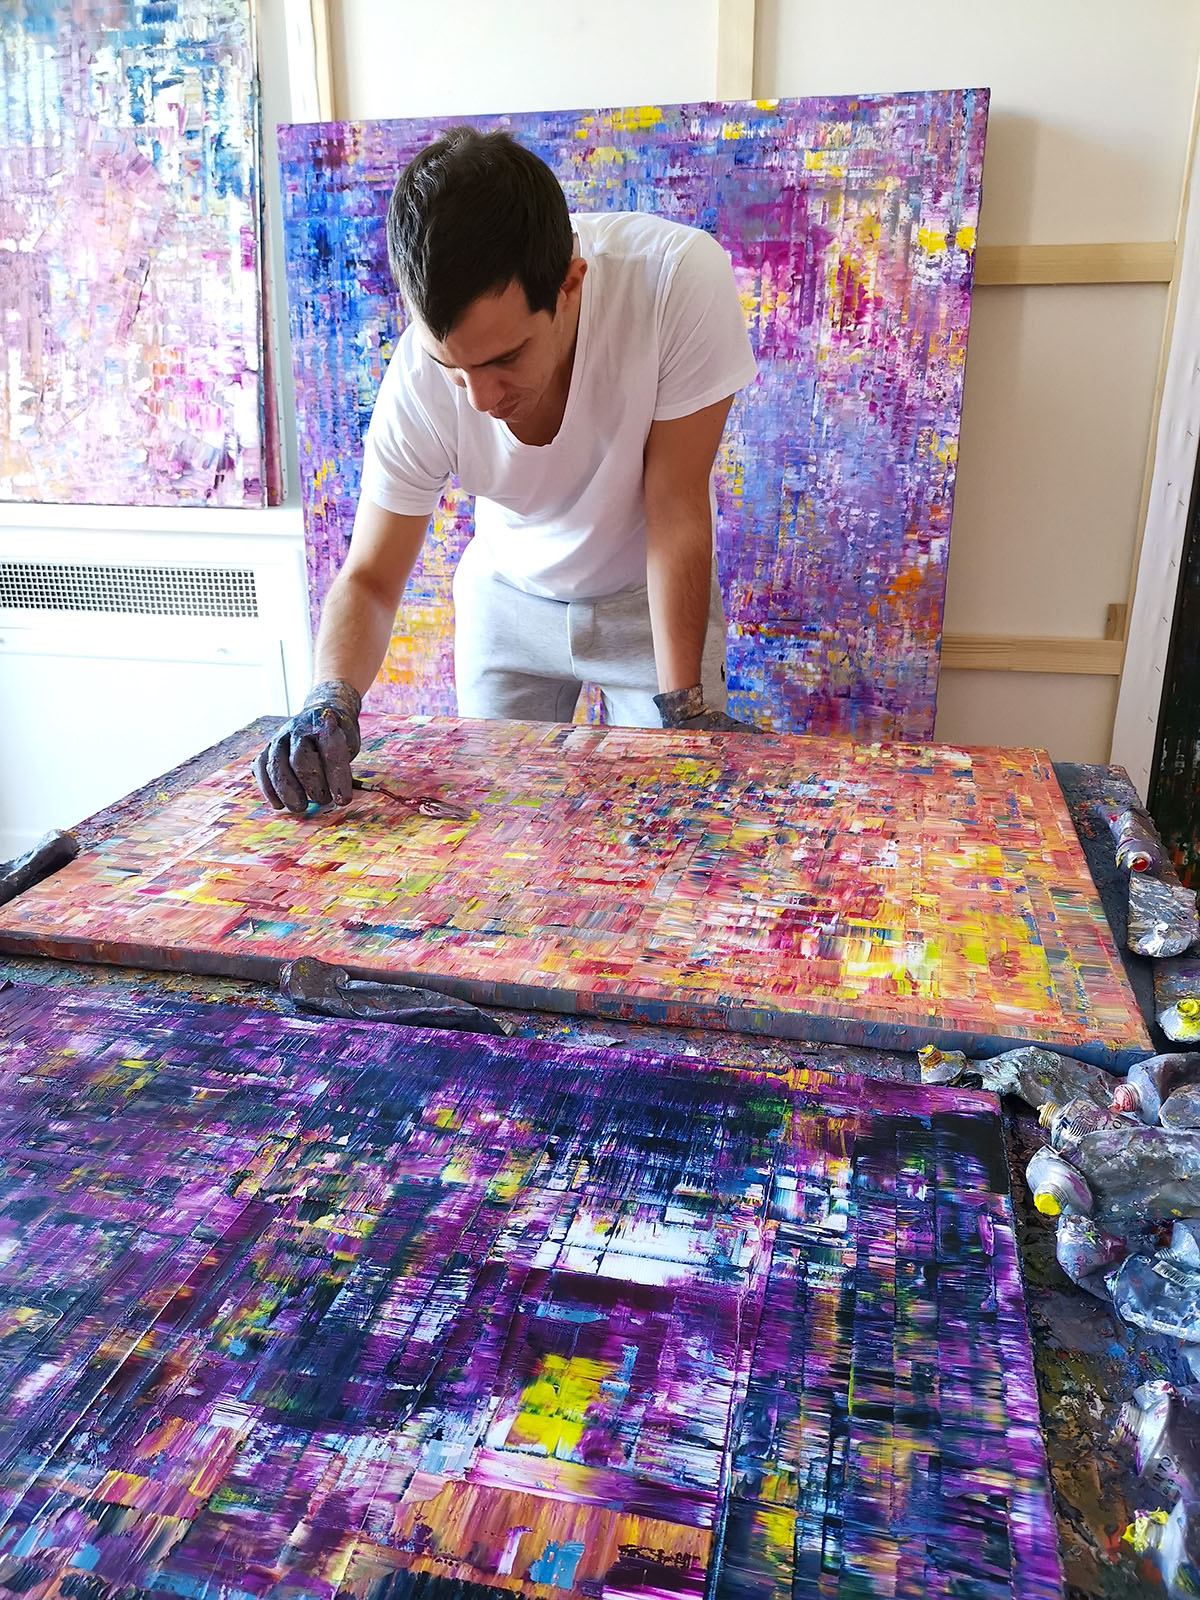 Artist in the process of painting onto a large canvas